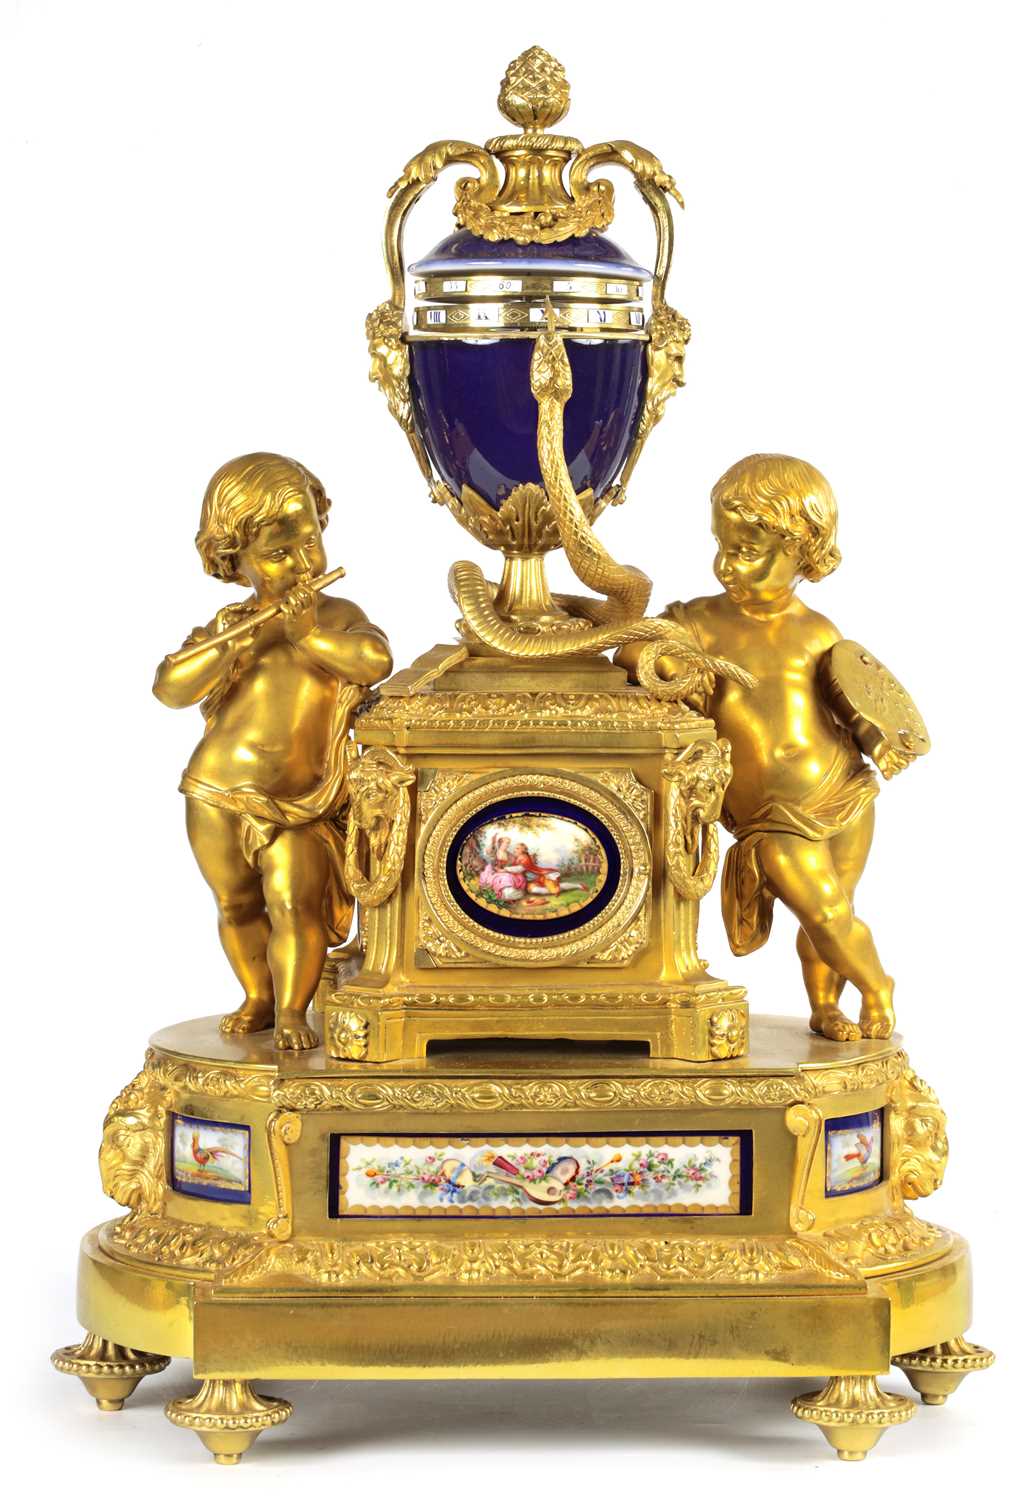 A FINE MID 19TH FRENCH ORMOLU AND 'SEVRES' PORCELAIN MOUNTED REVOLVING URN CLOCK